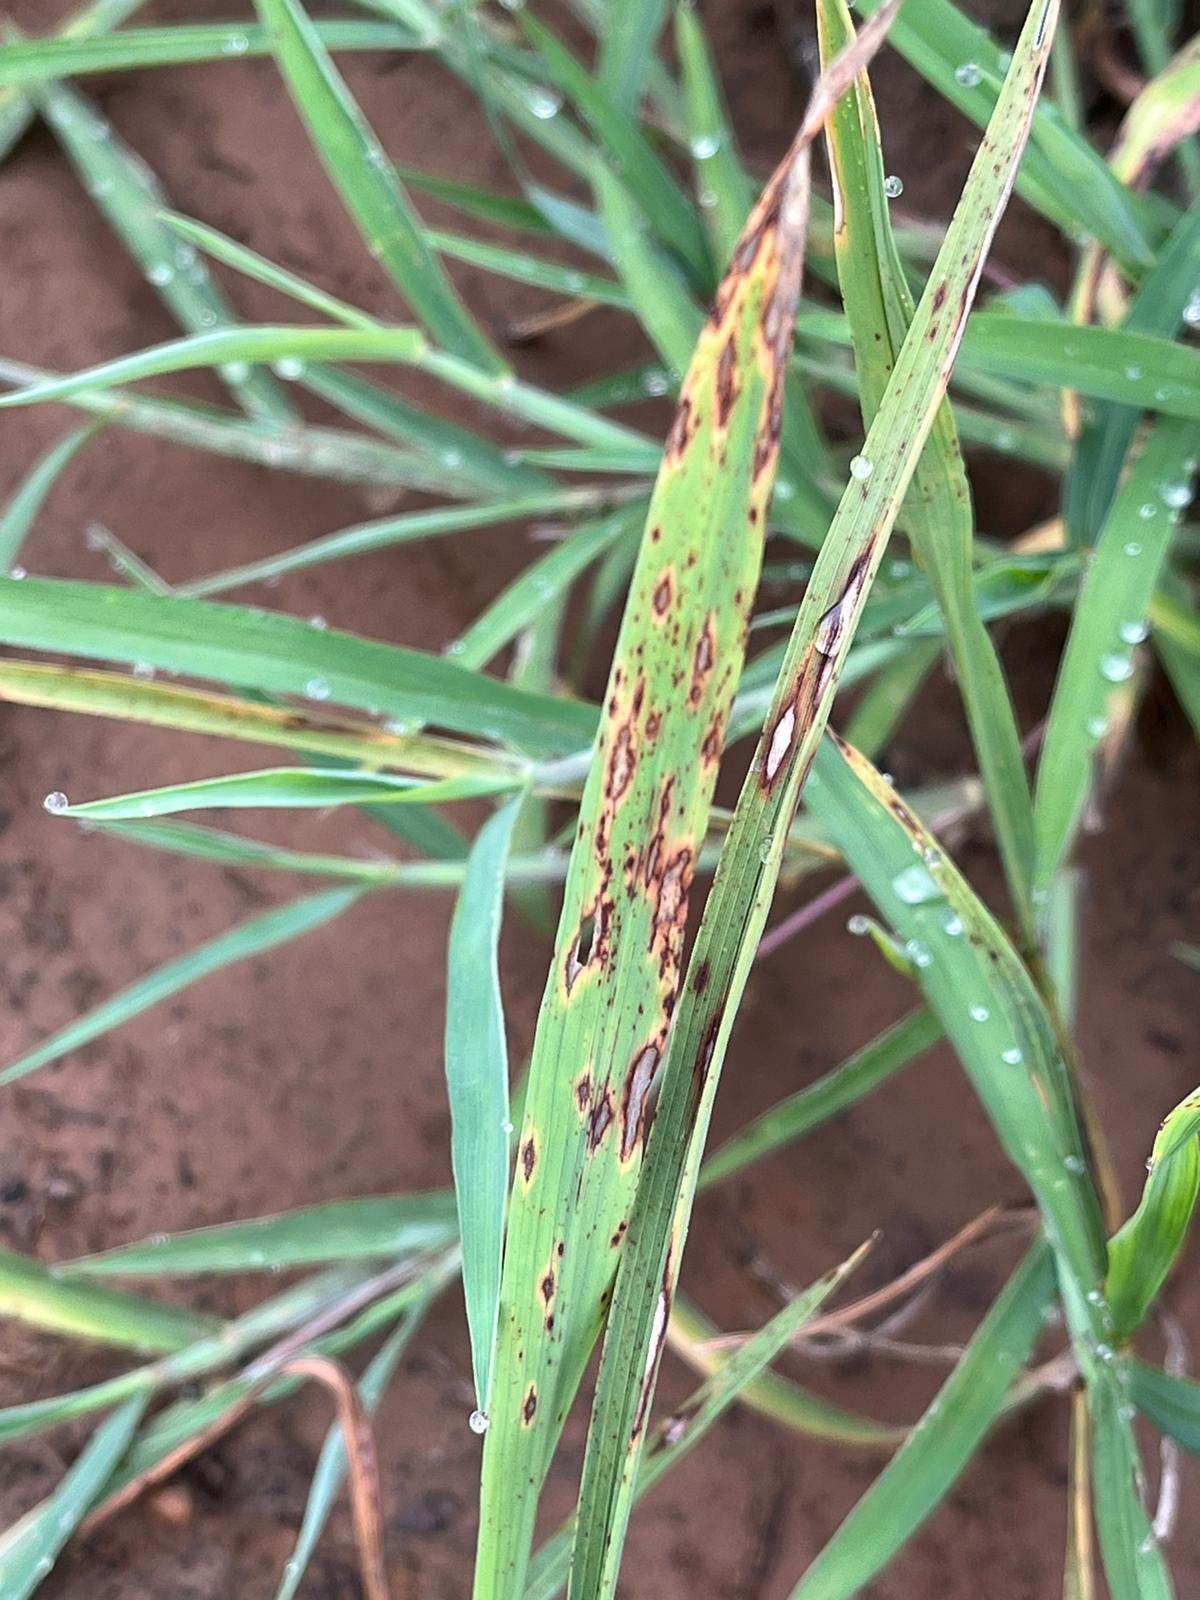 Rice plant showing signs of leaf blast